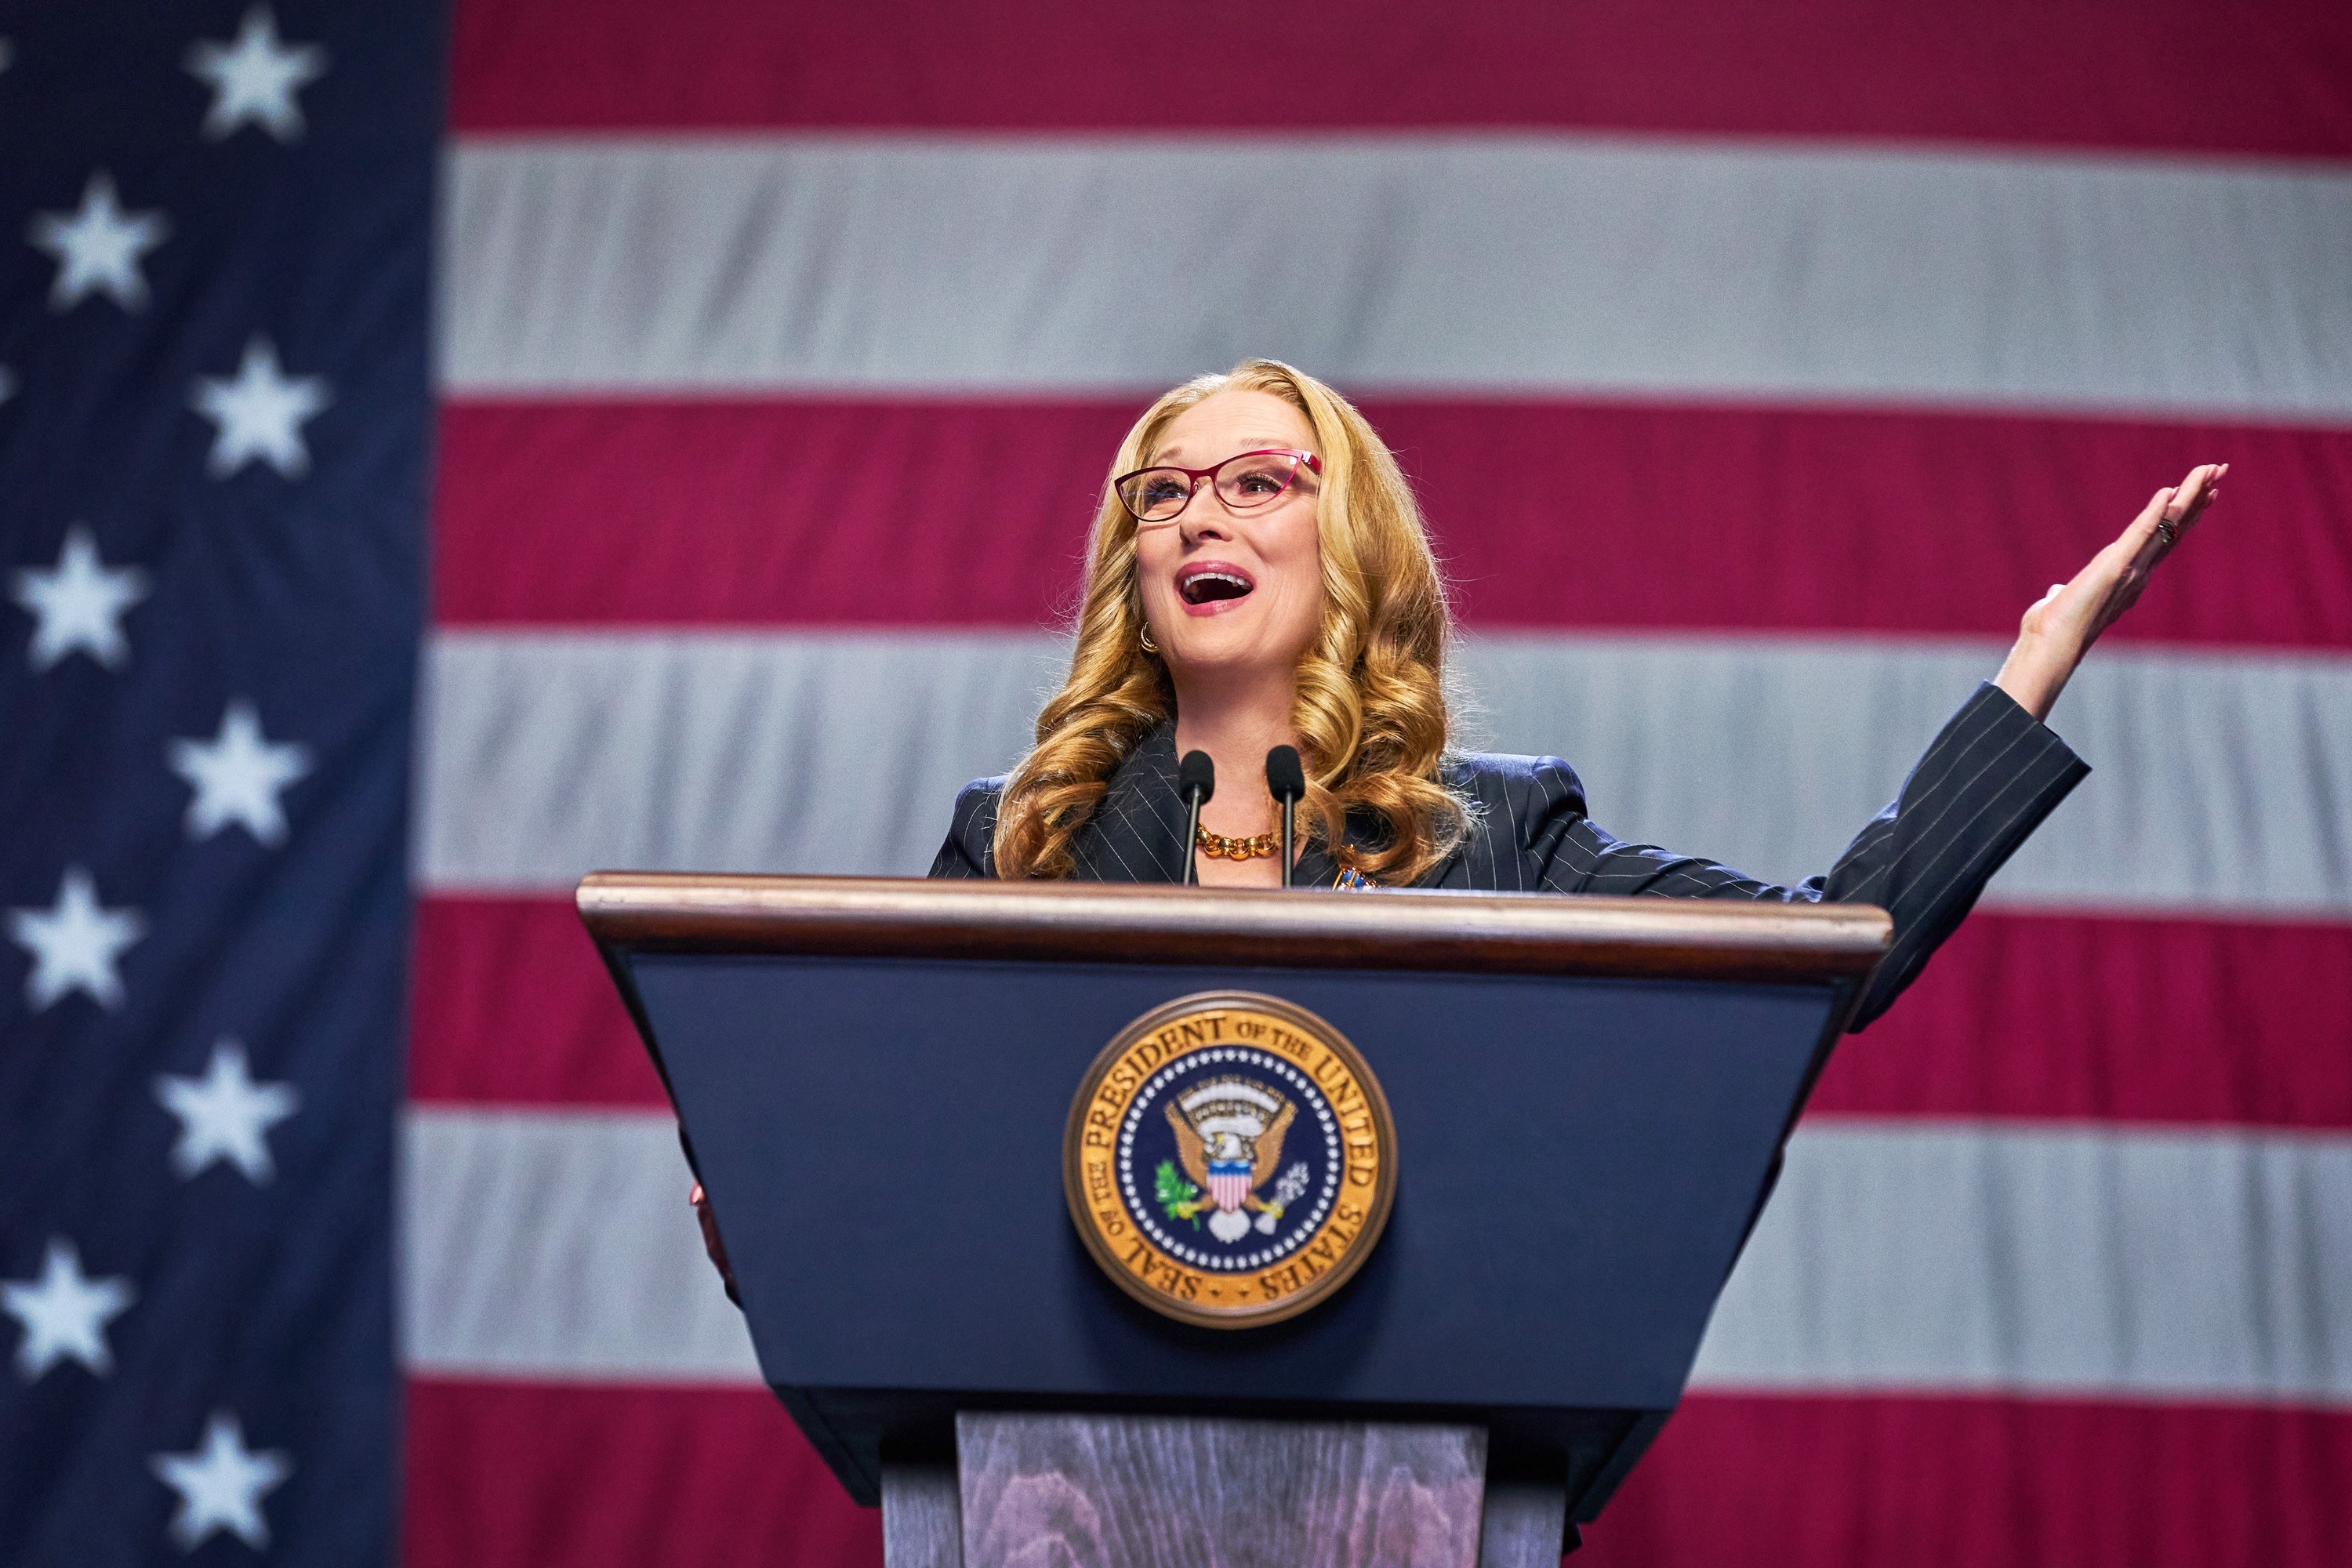 Meryl&#x27;s character giving a speech with a gigantic U.S. flag behind her